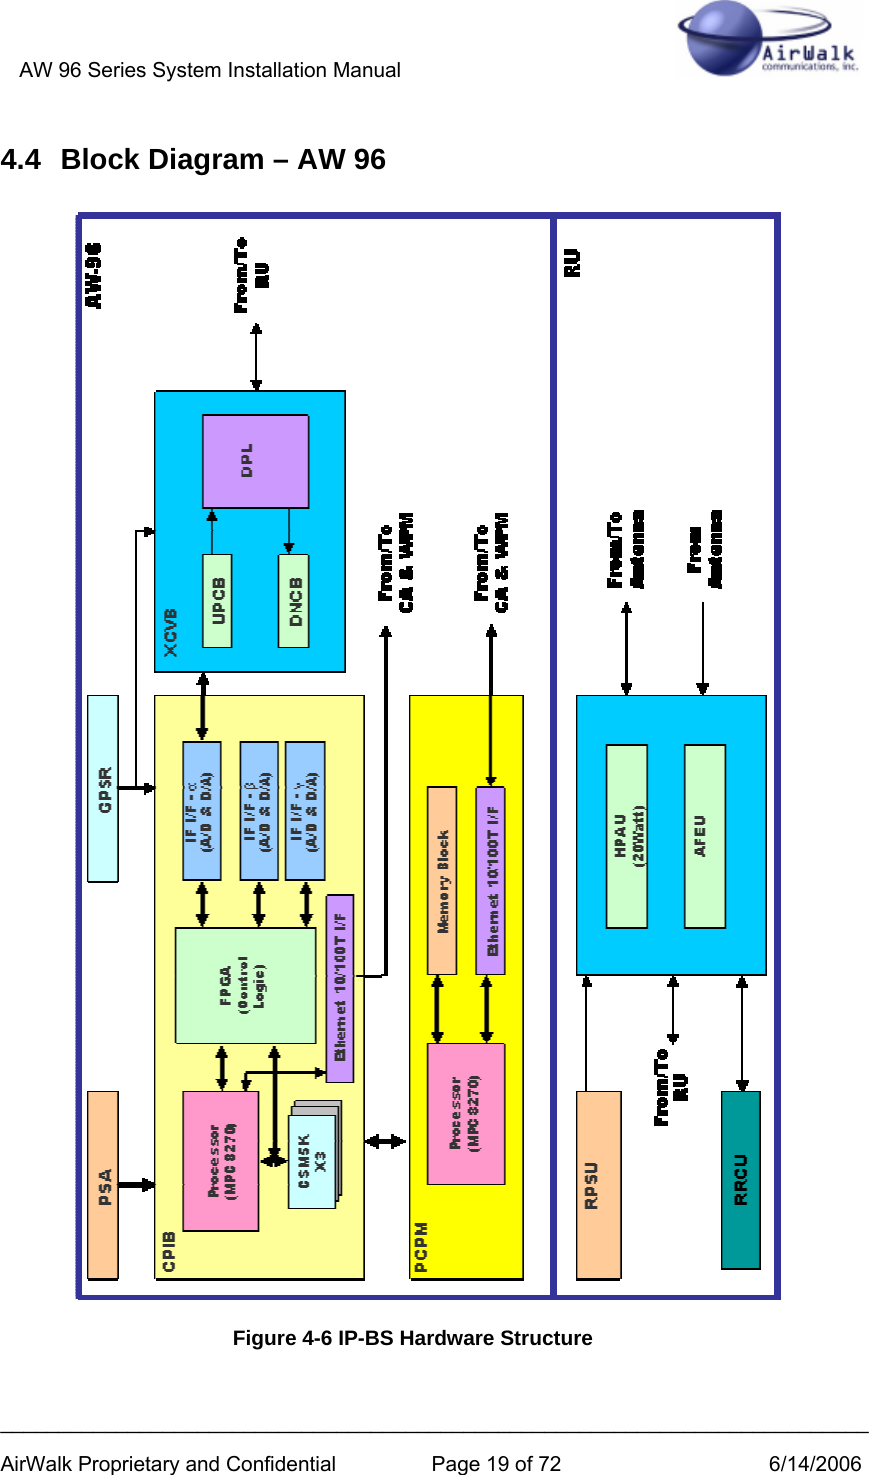 AW 96 Series System Installation Manual          ___________________________________________________________________________ AirWalk Proprietary and Confidential  Page 19 of 72  6/14/2006 4.4  Block Diagram – AW 96  Figure 4-6 IP-BS Hardware Structure 